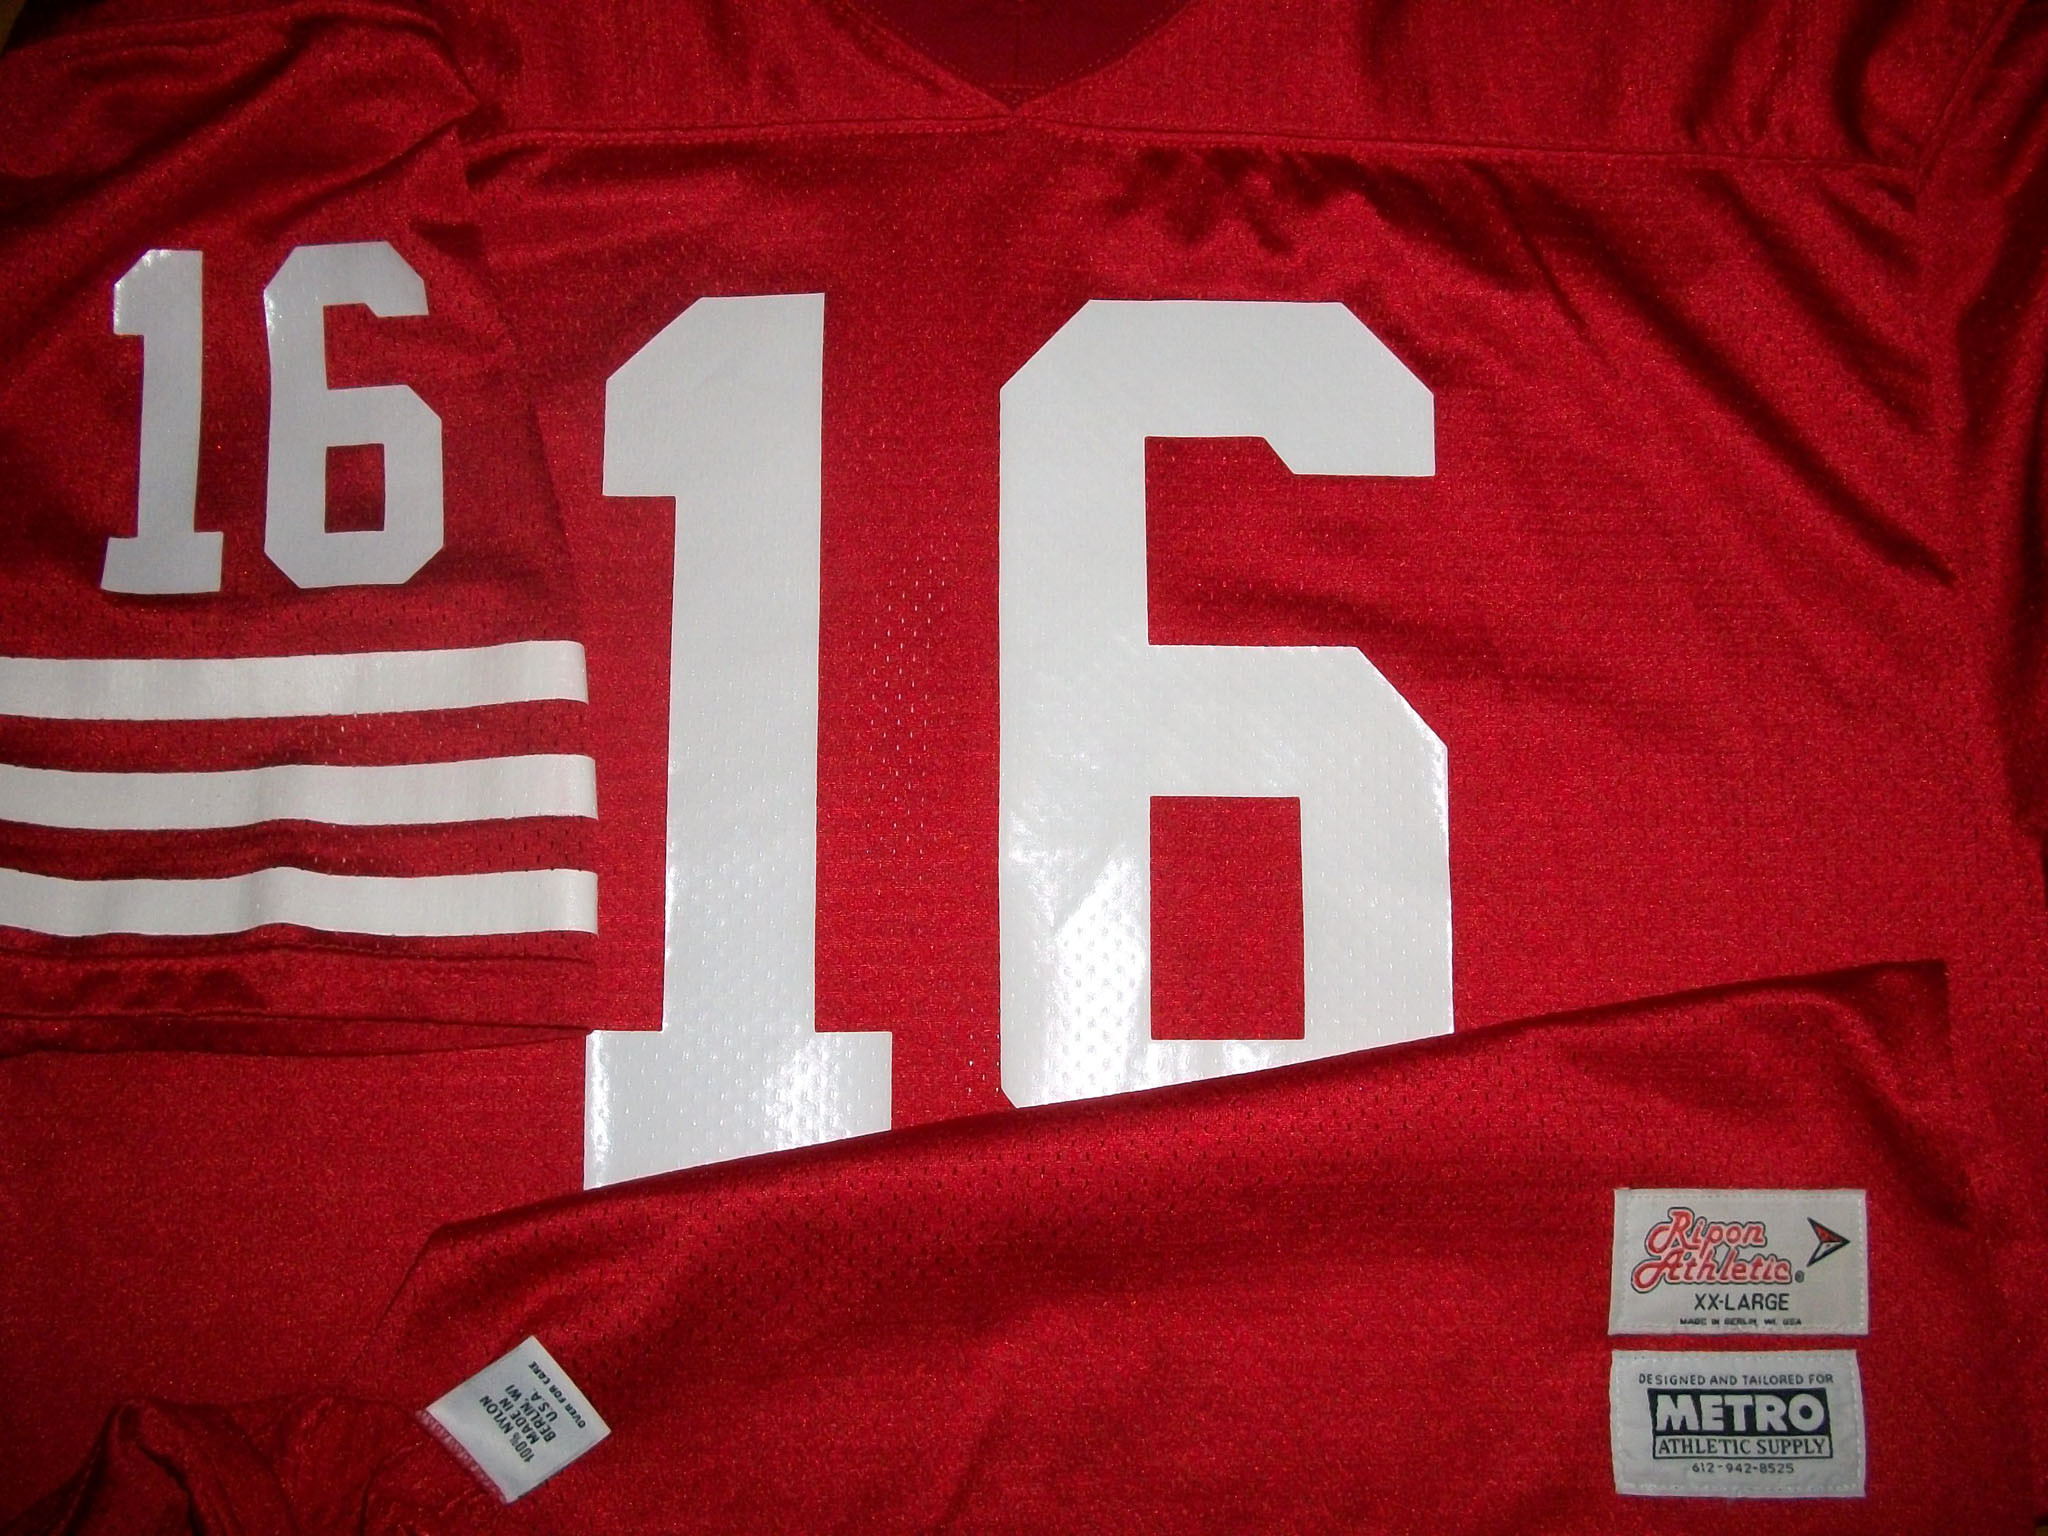 2048x1536 Up for sale is a Vintage 1988 San Francisco 49ers Joe Montana Pro Cut  Authentic Game Jersey! This jersey is made in Berlin, WI USA by Ripon  Athletic during ...